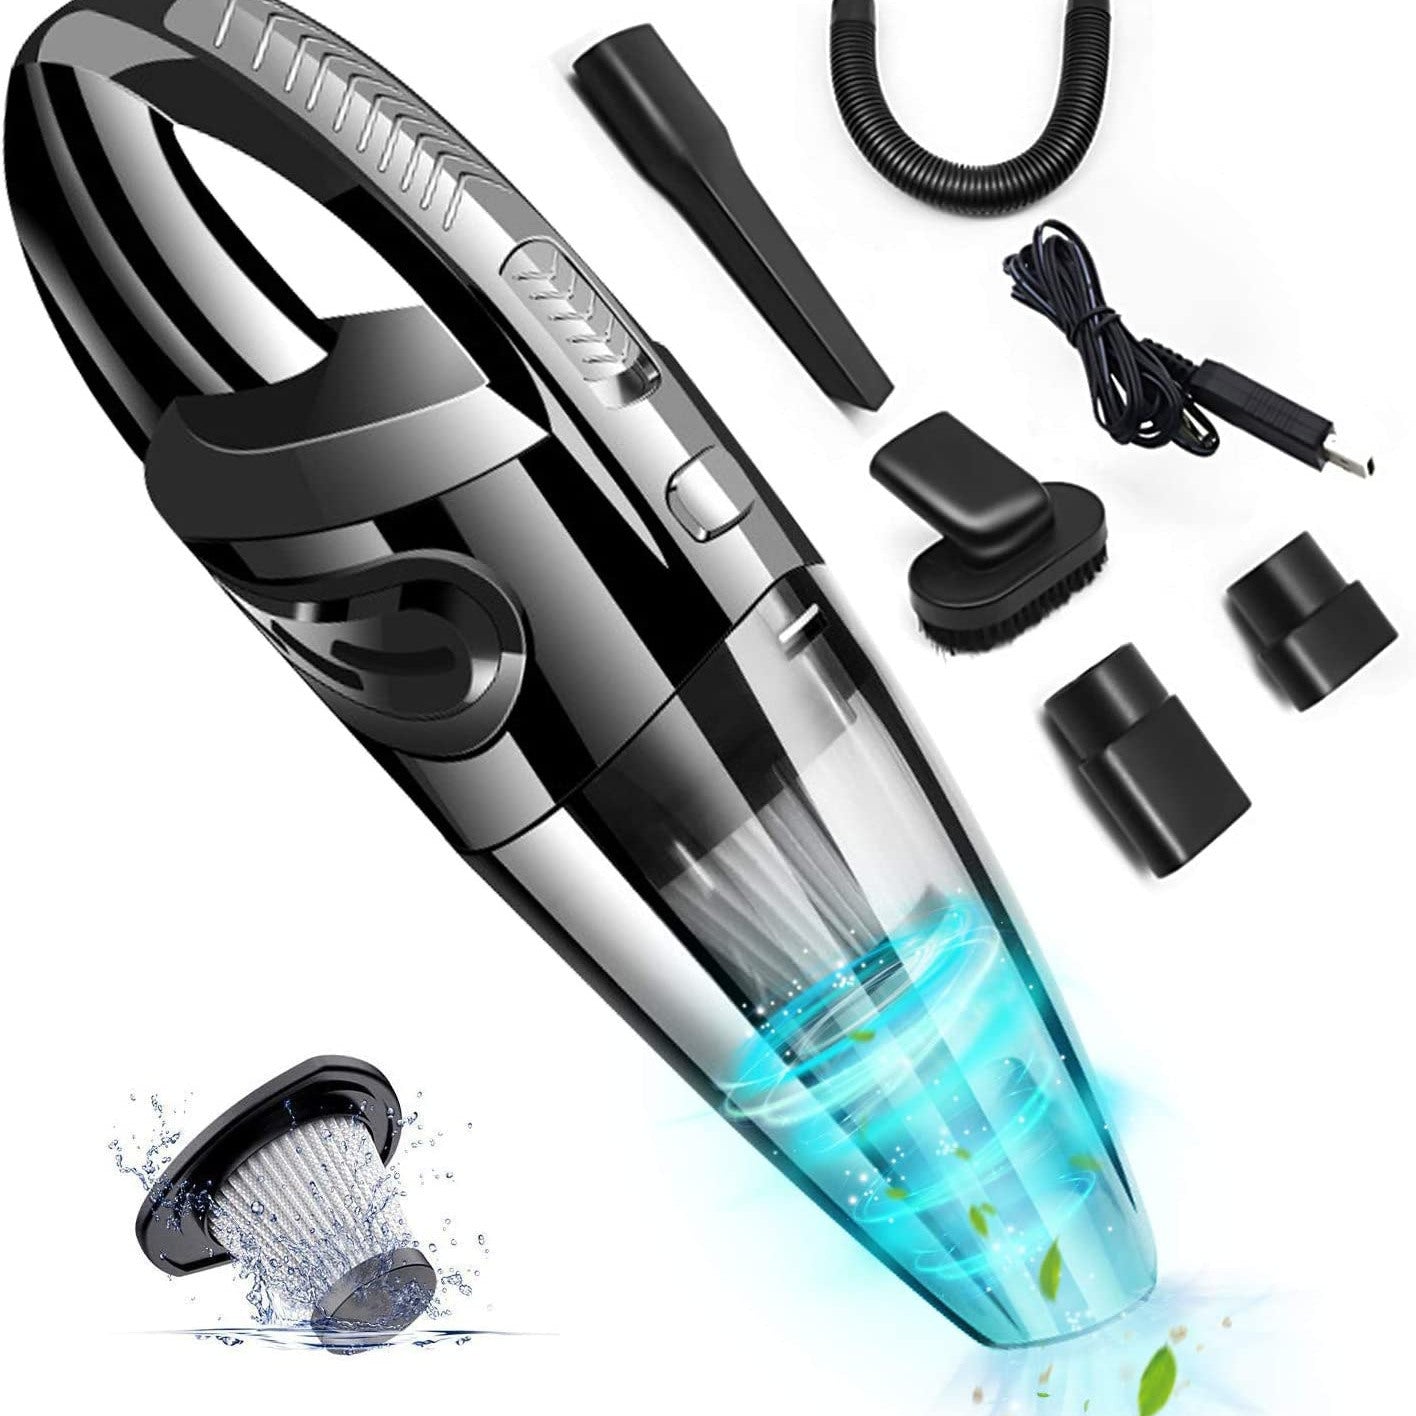 A Cordless Rechargeable Lightweight Portable Mini Hand Vac With Powerful Cyclonic Suction For Wet Dry Car Pet Hair Home Use with various attachments displayed, showcasing its versatility and wet-dry cleaning capability.